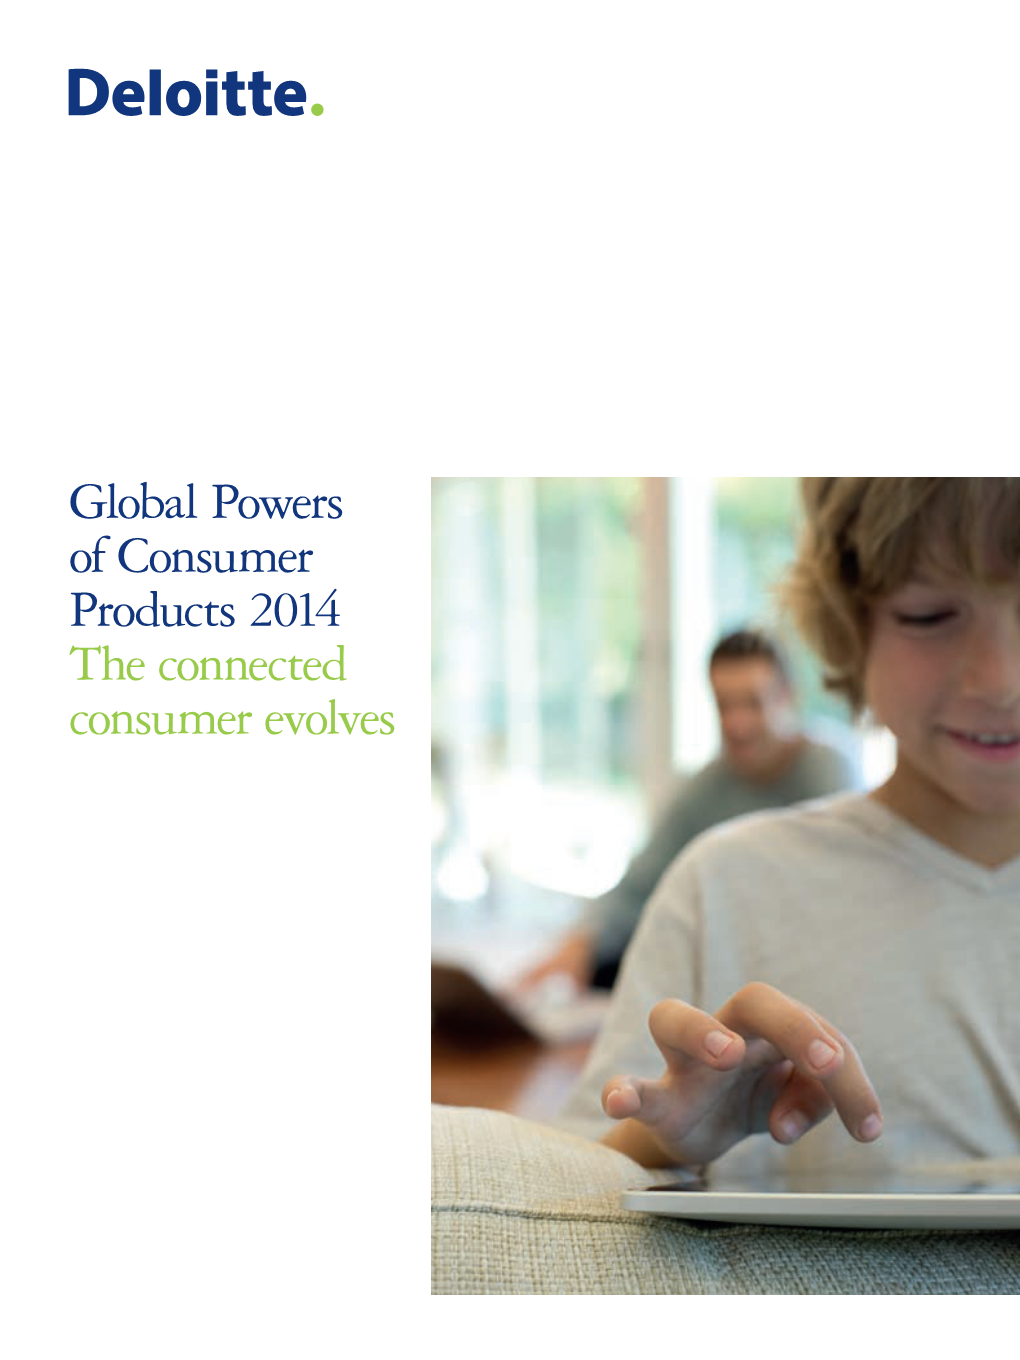 Global Powers of Consumer Products 2014